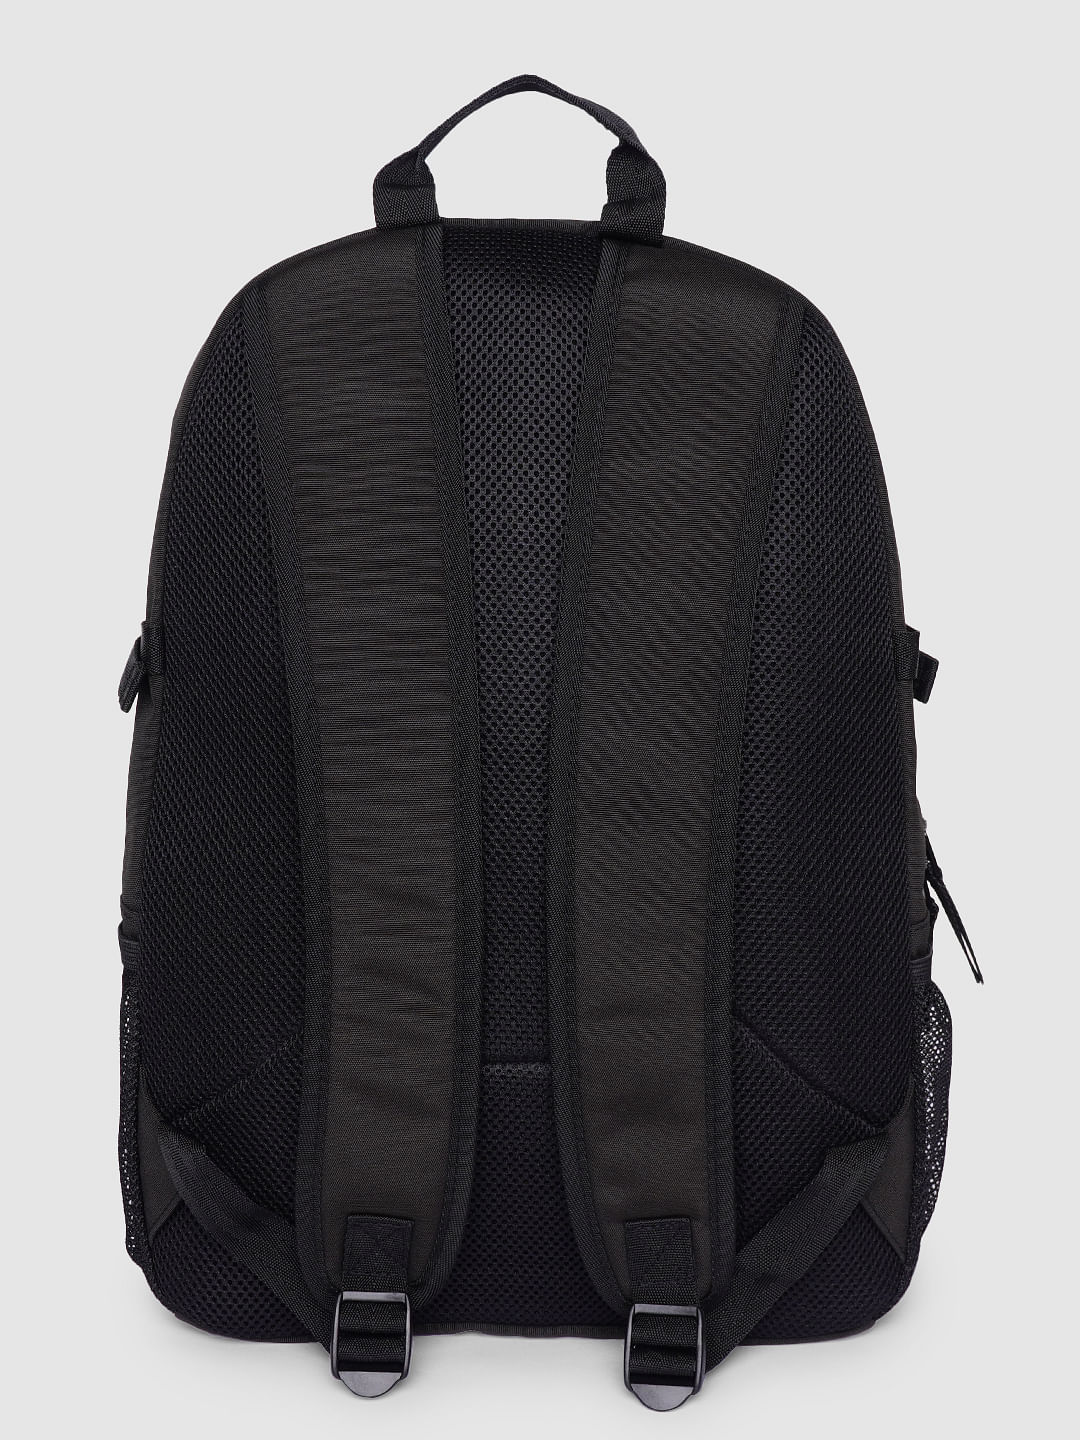 LBP58 - Laptop Backpack - SWISS MILITARY CONSUMER GOODS LIMITED